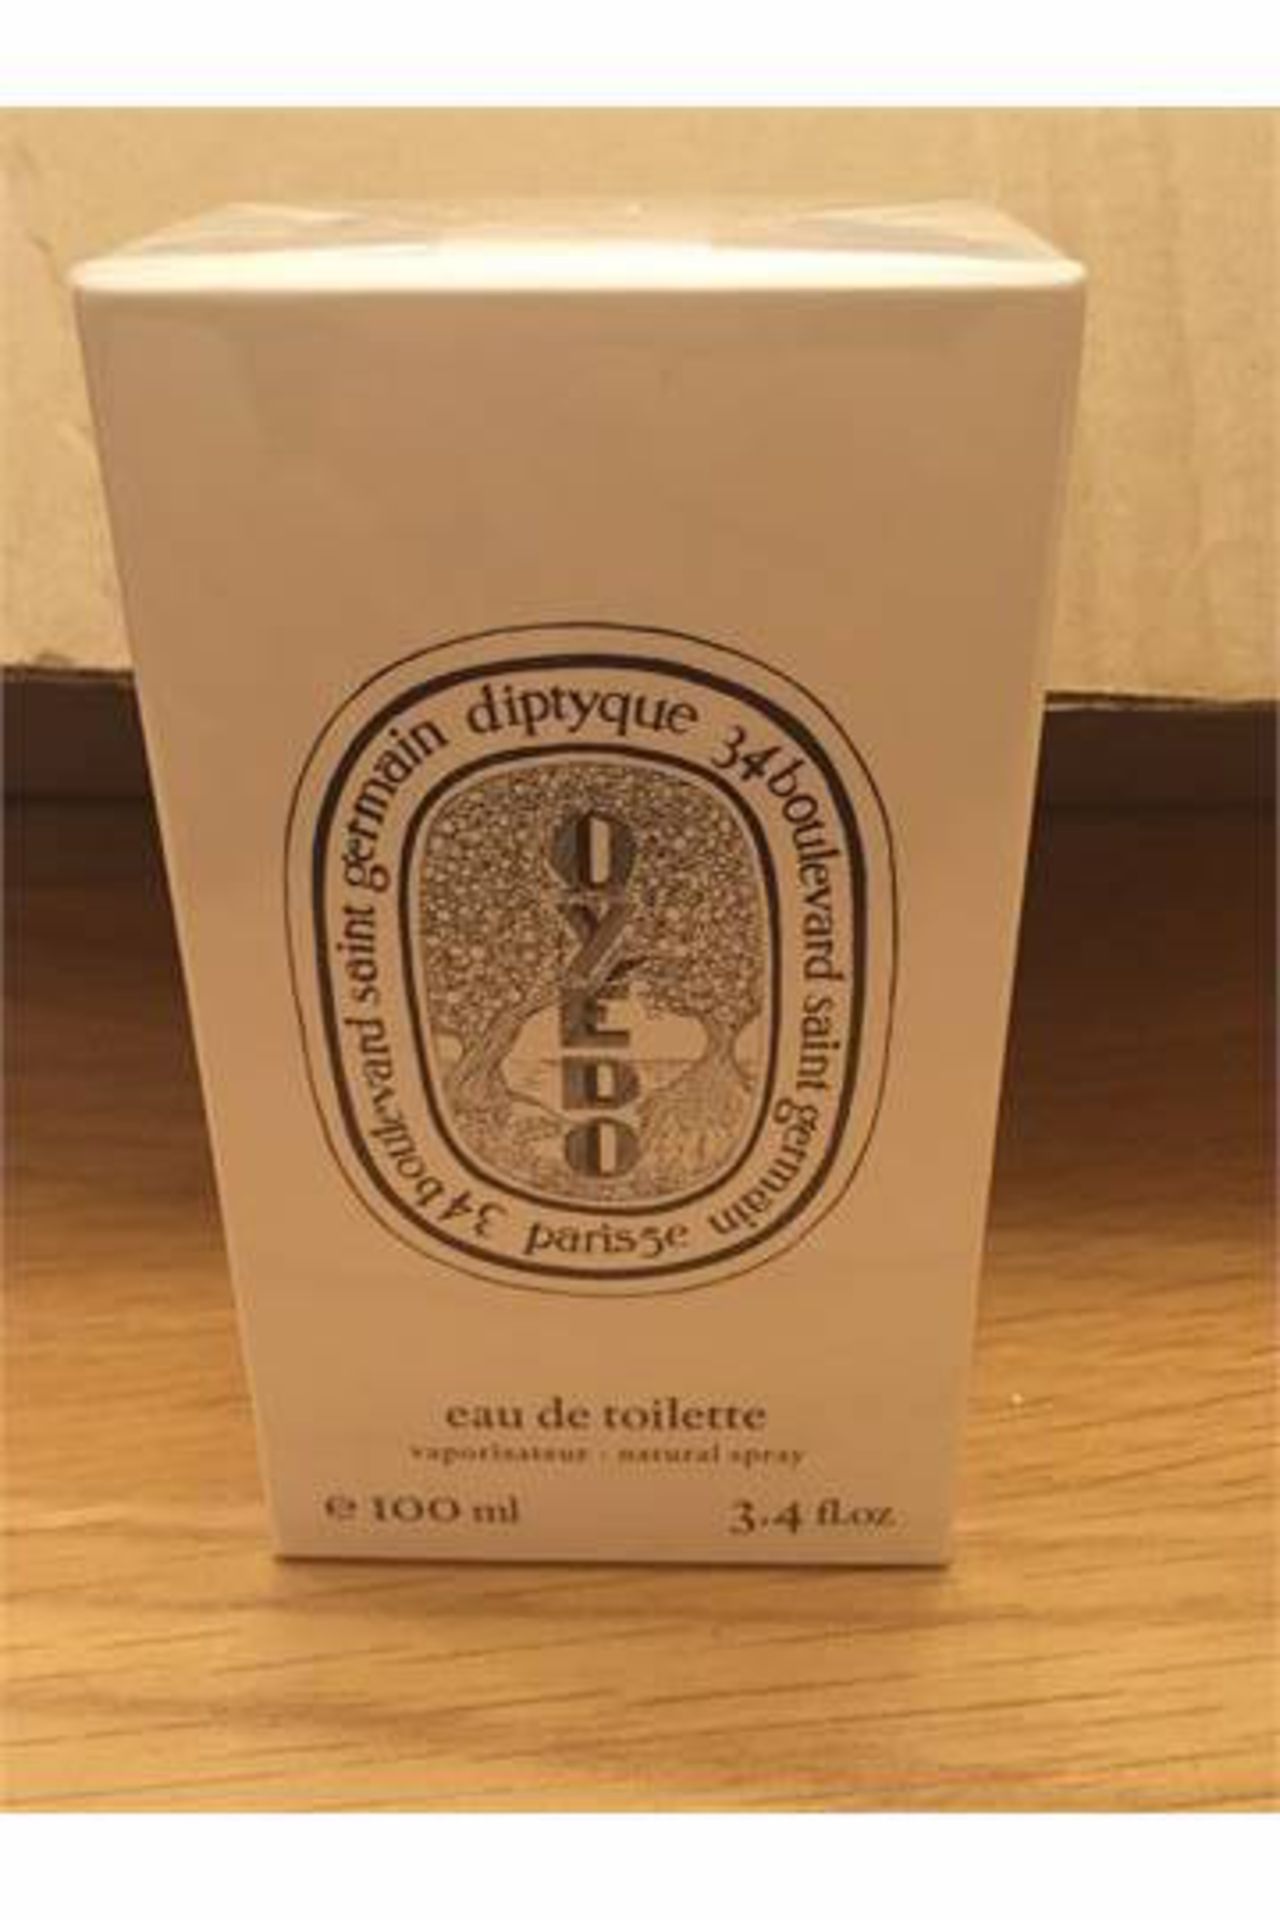 Diptyque Oyedo EDT 100Ml, Another RARE EDT - RRP £73.90_Brand new,Sealed, Genuine.